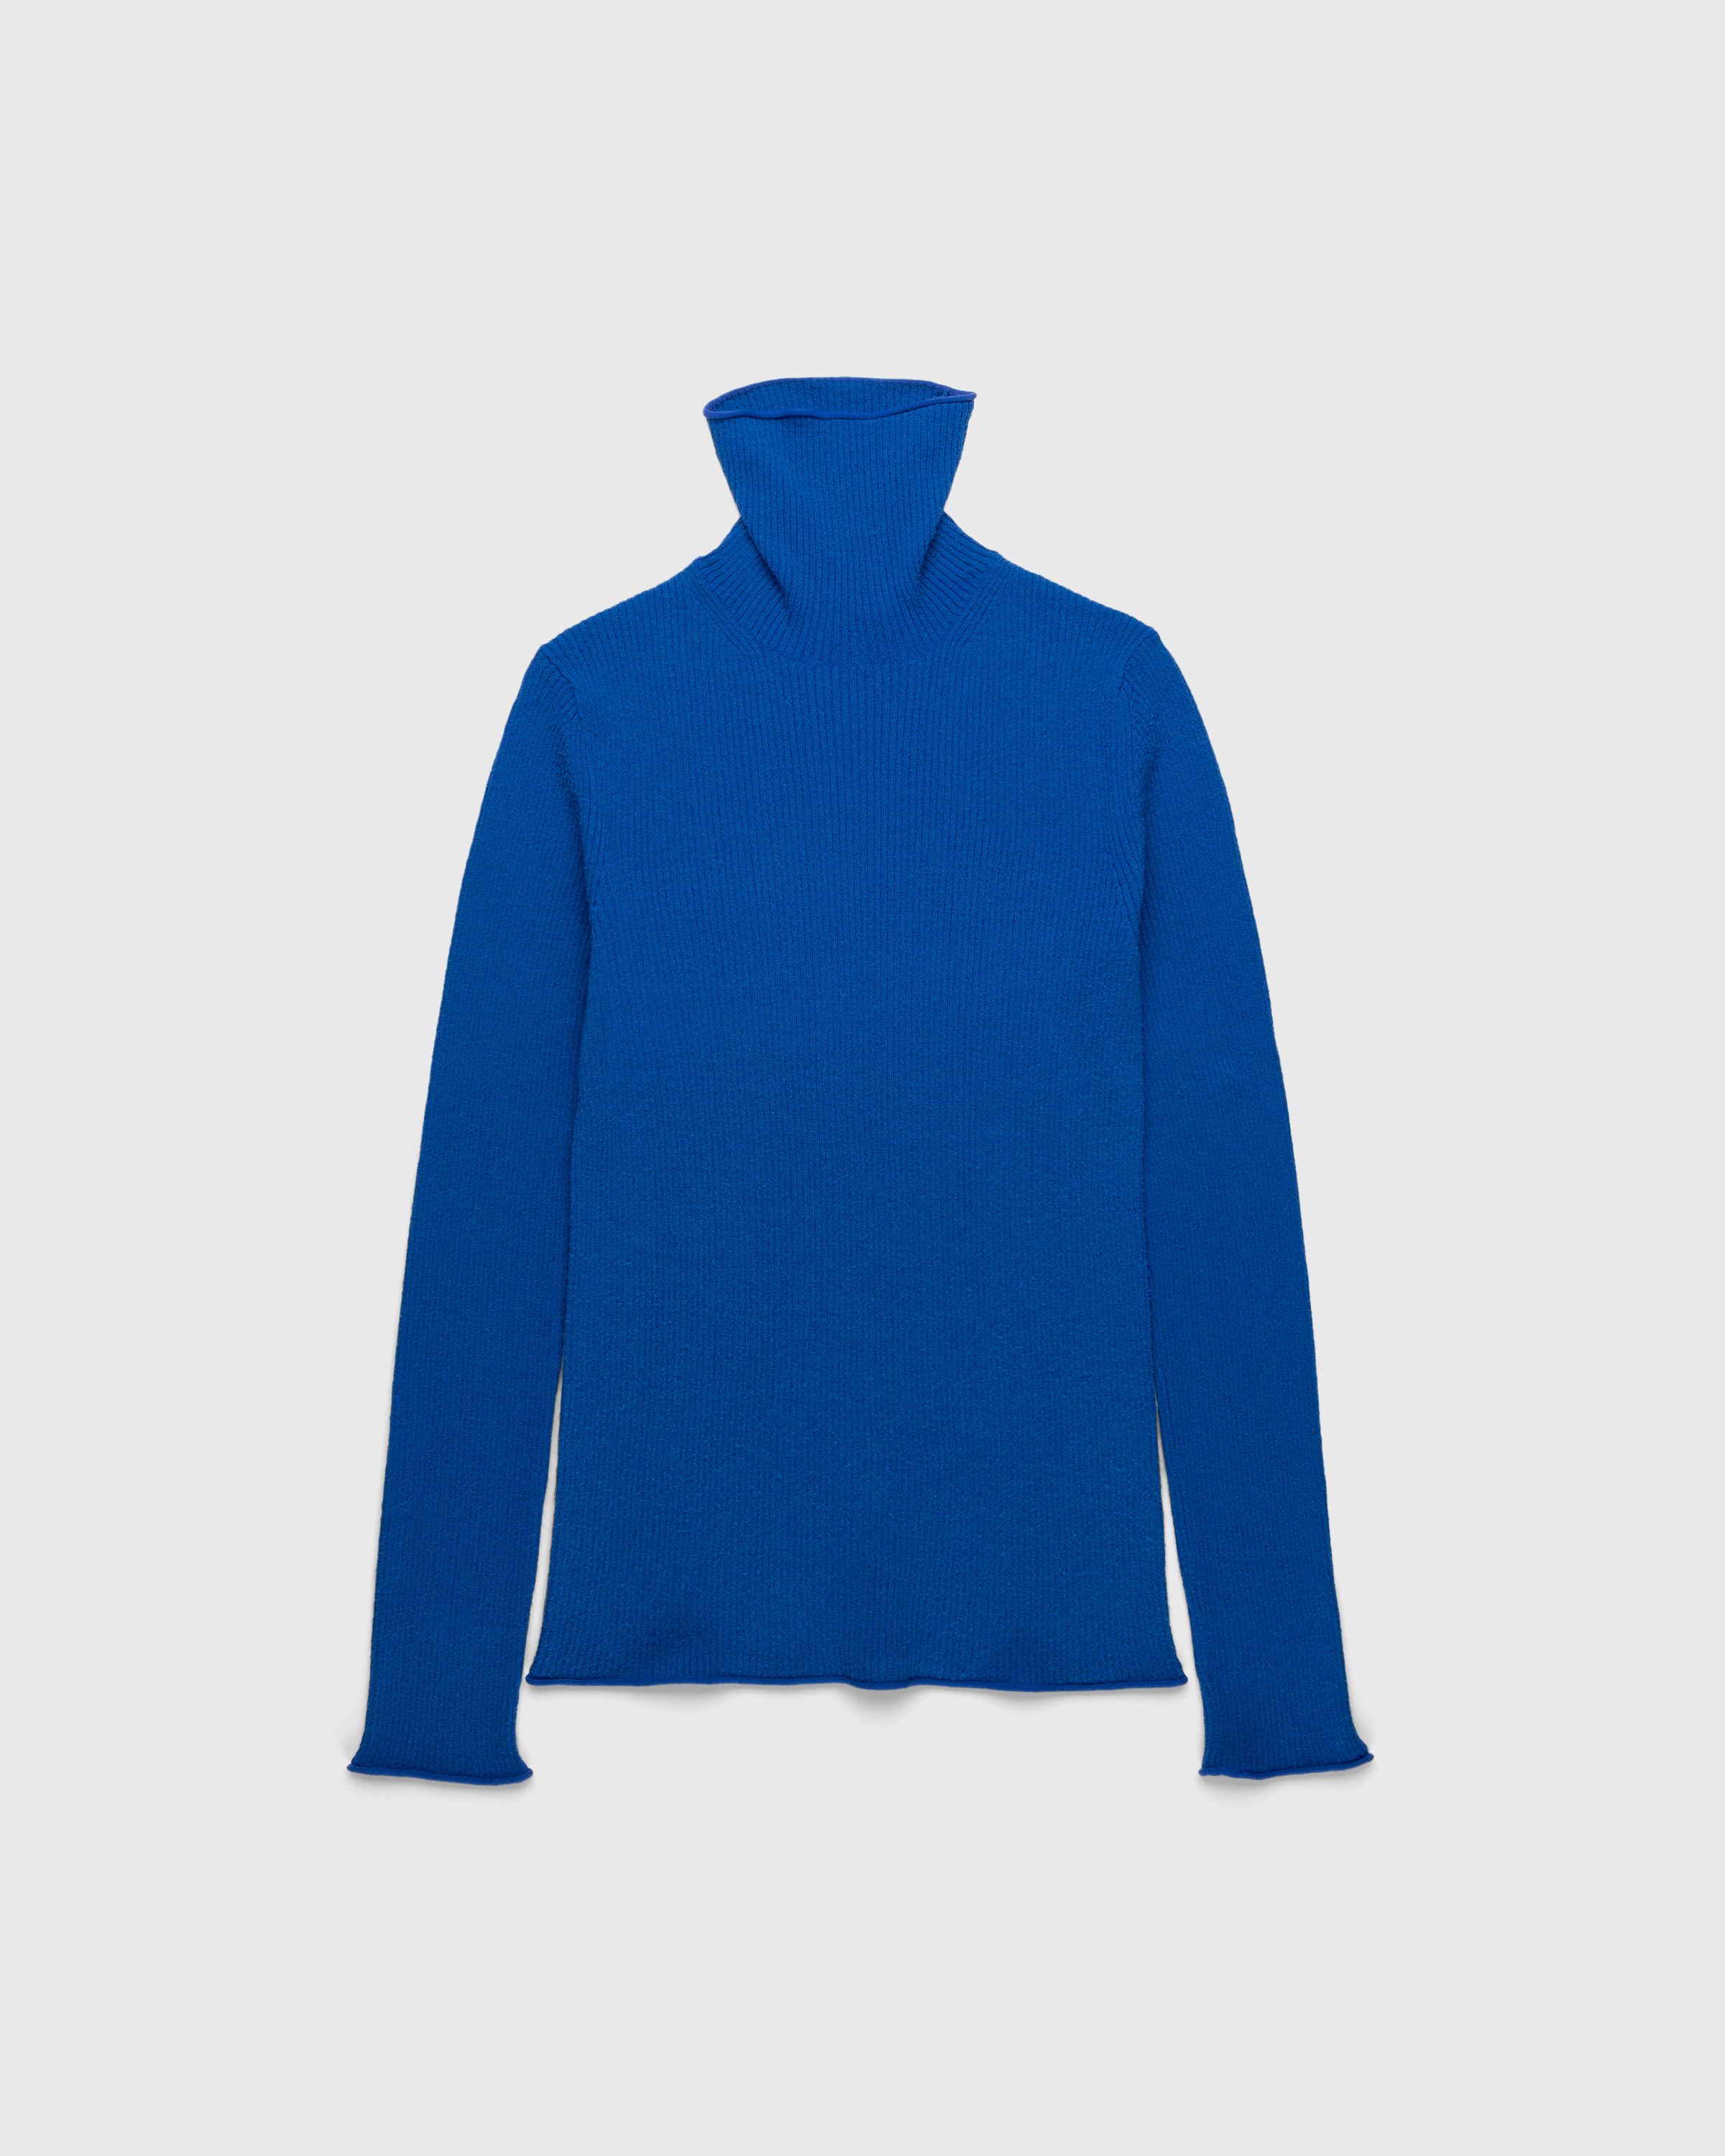 Acne Studios - Roll Neck Ribbed Knit Sweater Ultramarine Blue - Clothing - Blue - Image 1